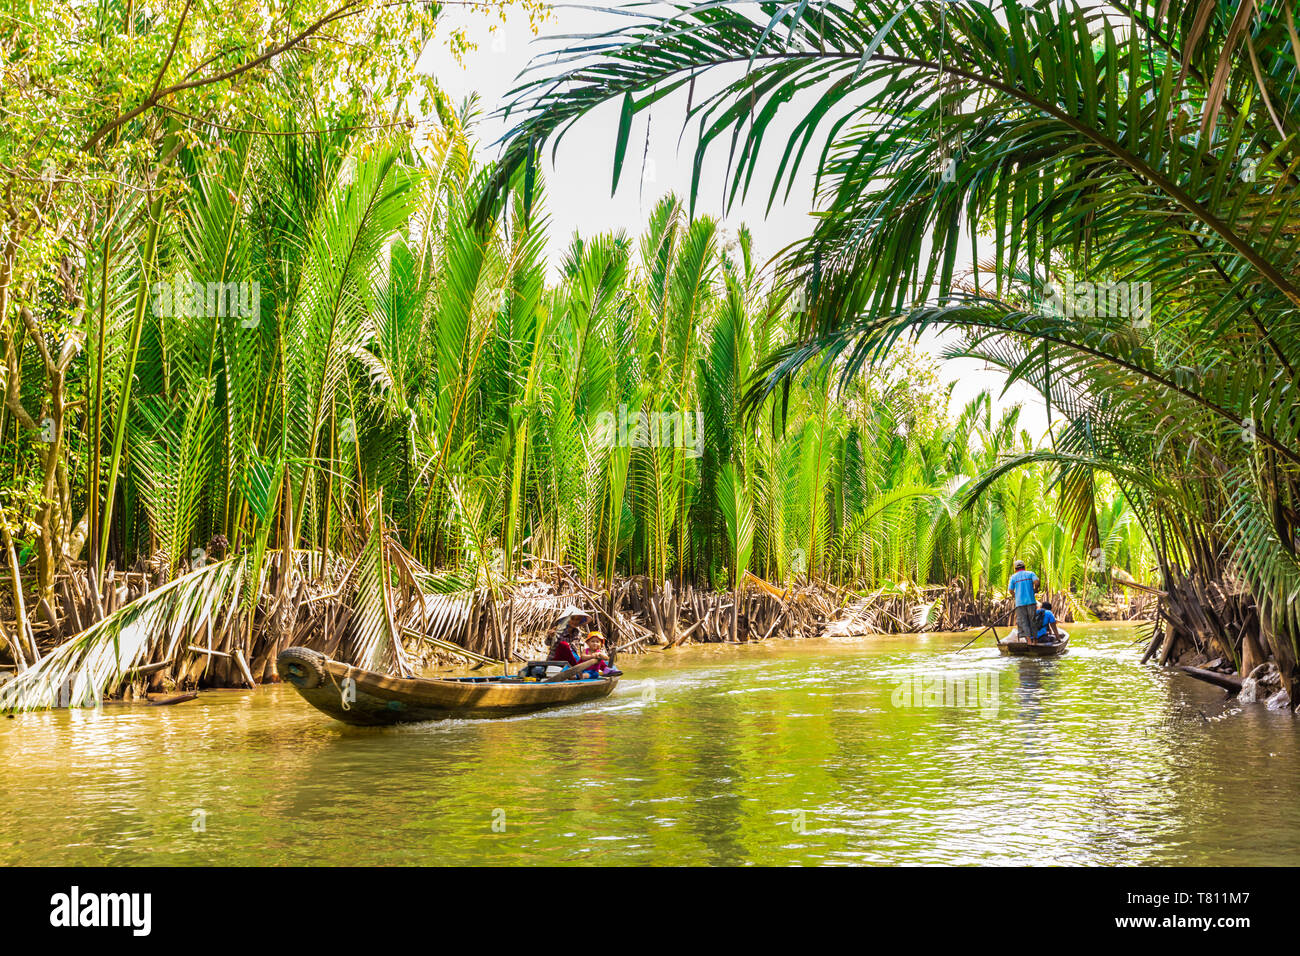 Sailing on the tributaries of the Mekong River, Vietnam, Indochina, Southeast Asia, Asia Stock Photo